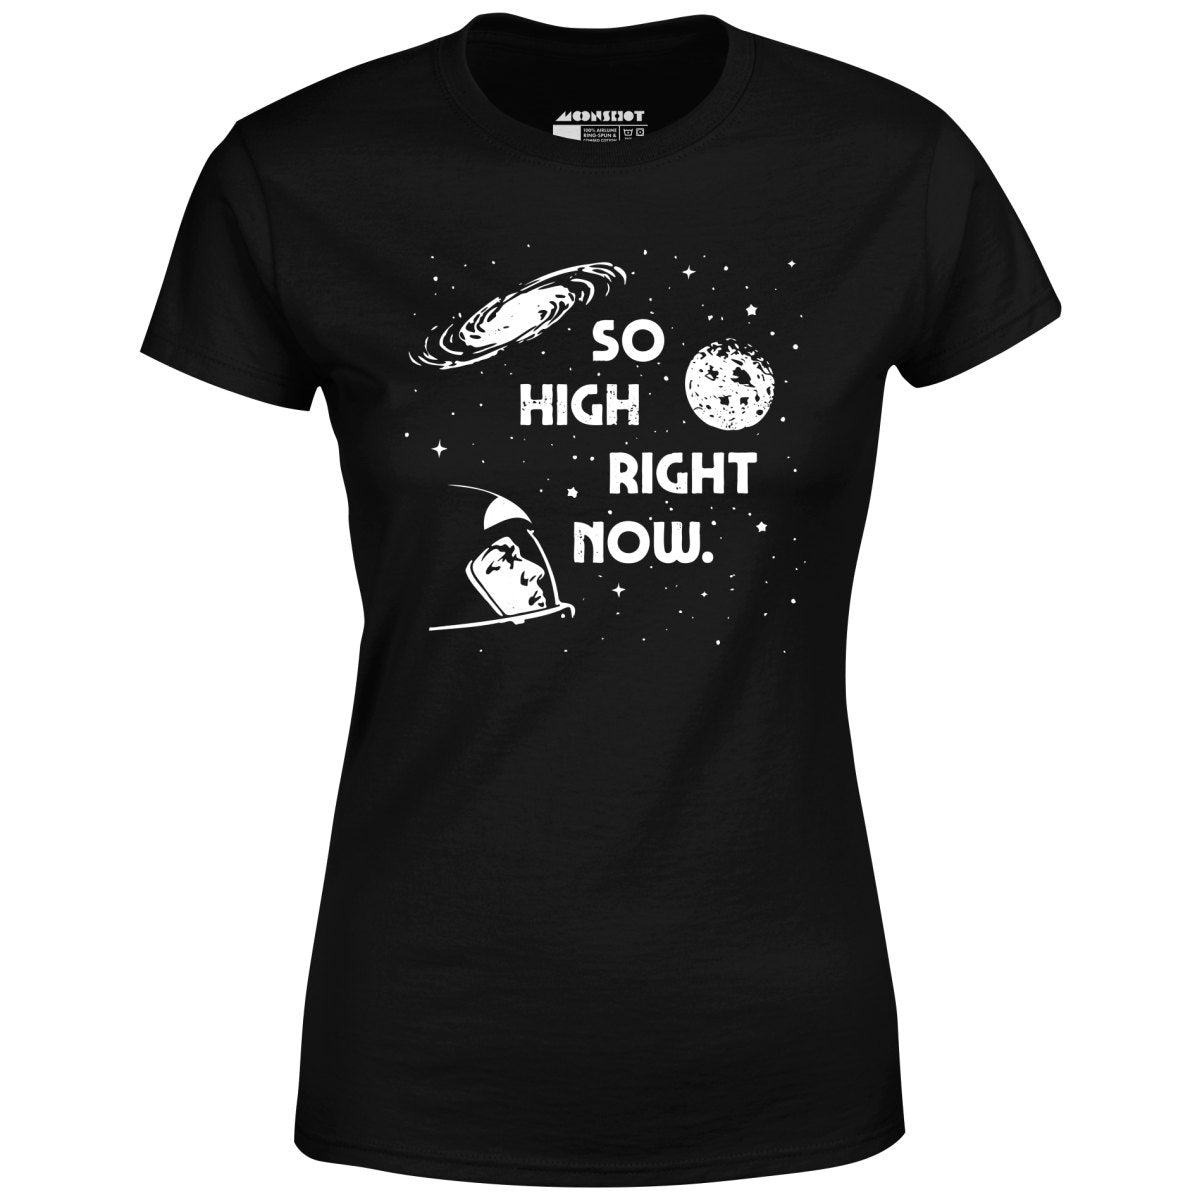 So High Right Now - Women's T-Shirt